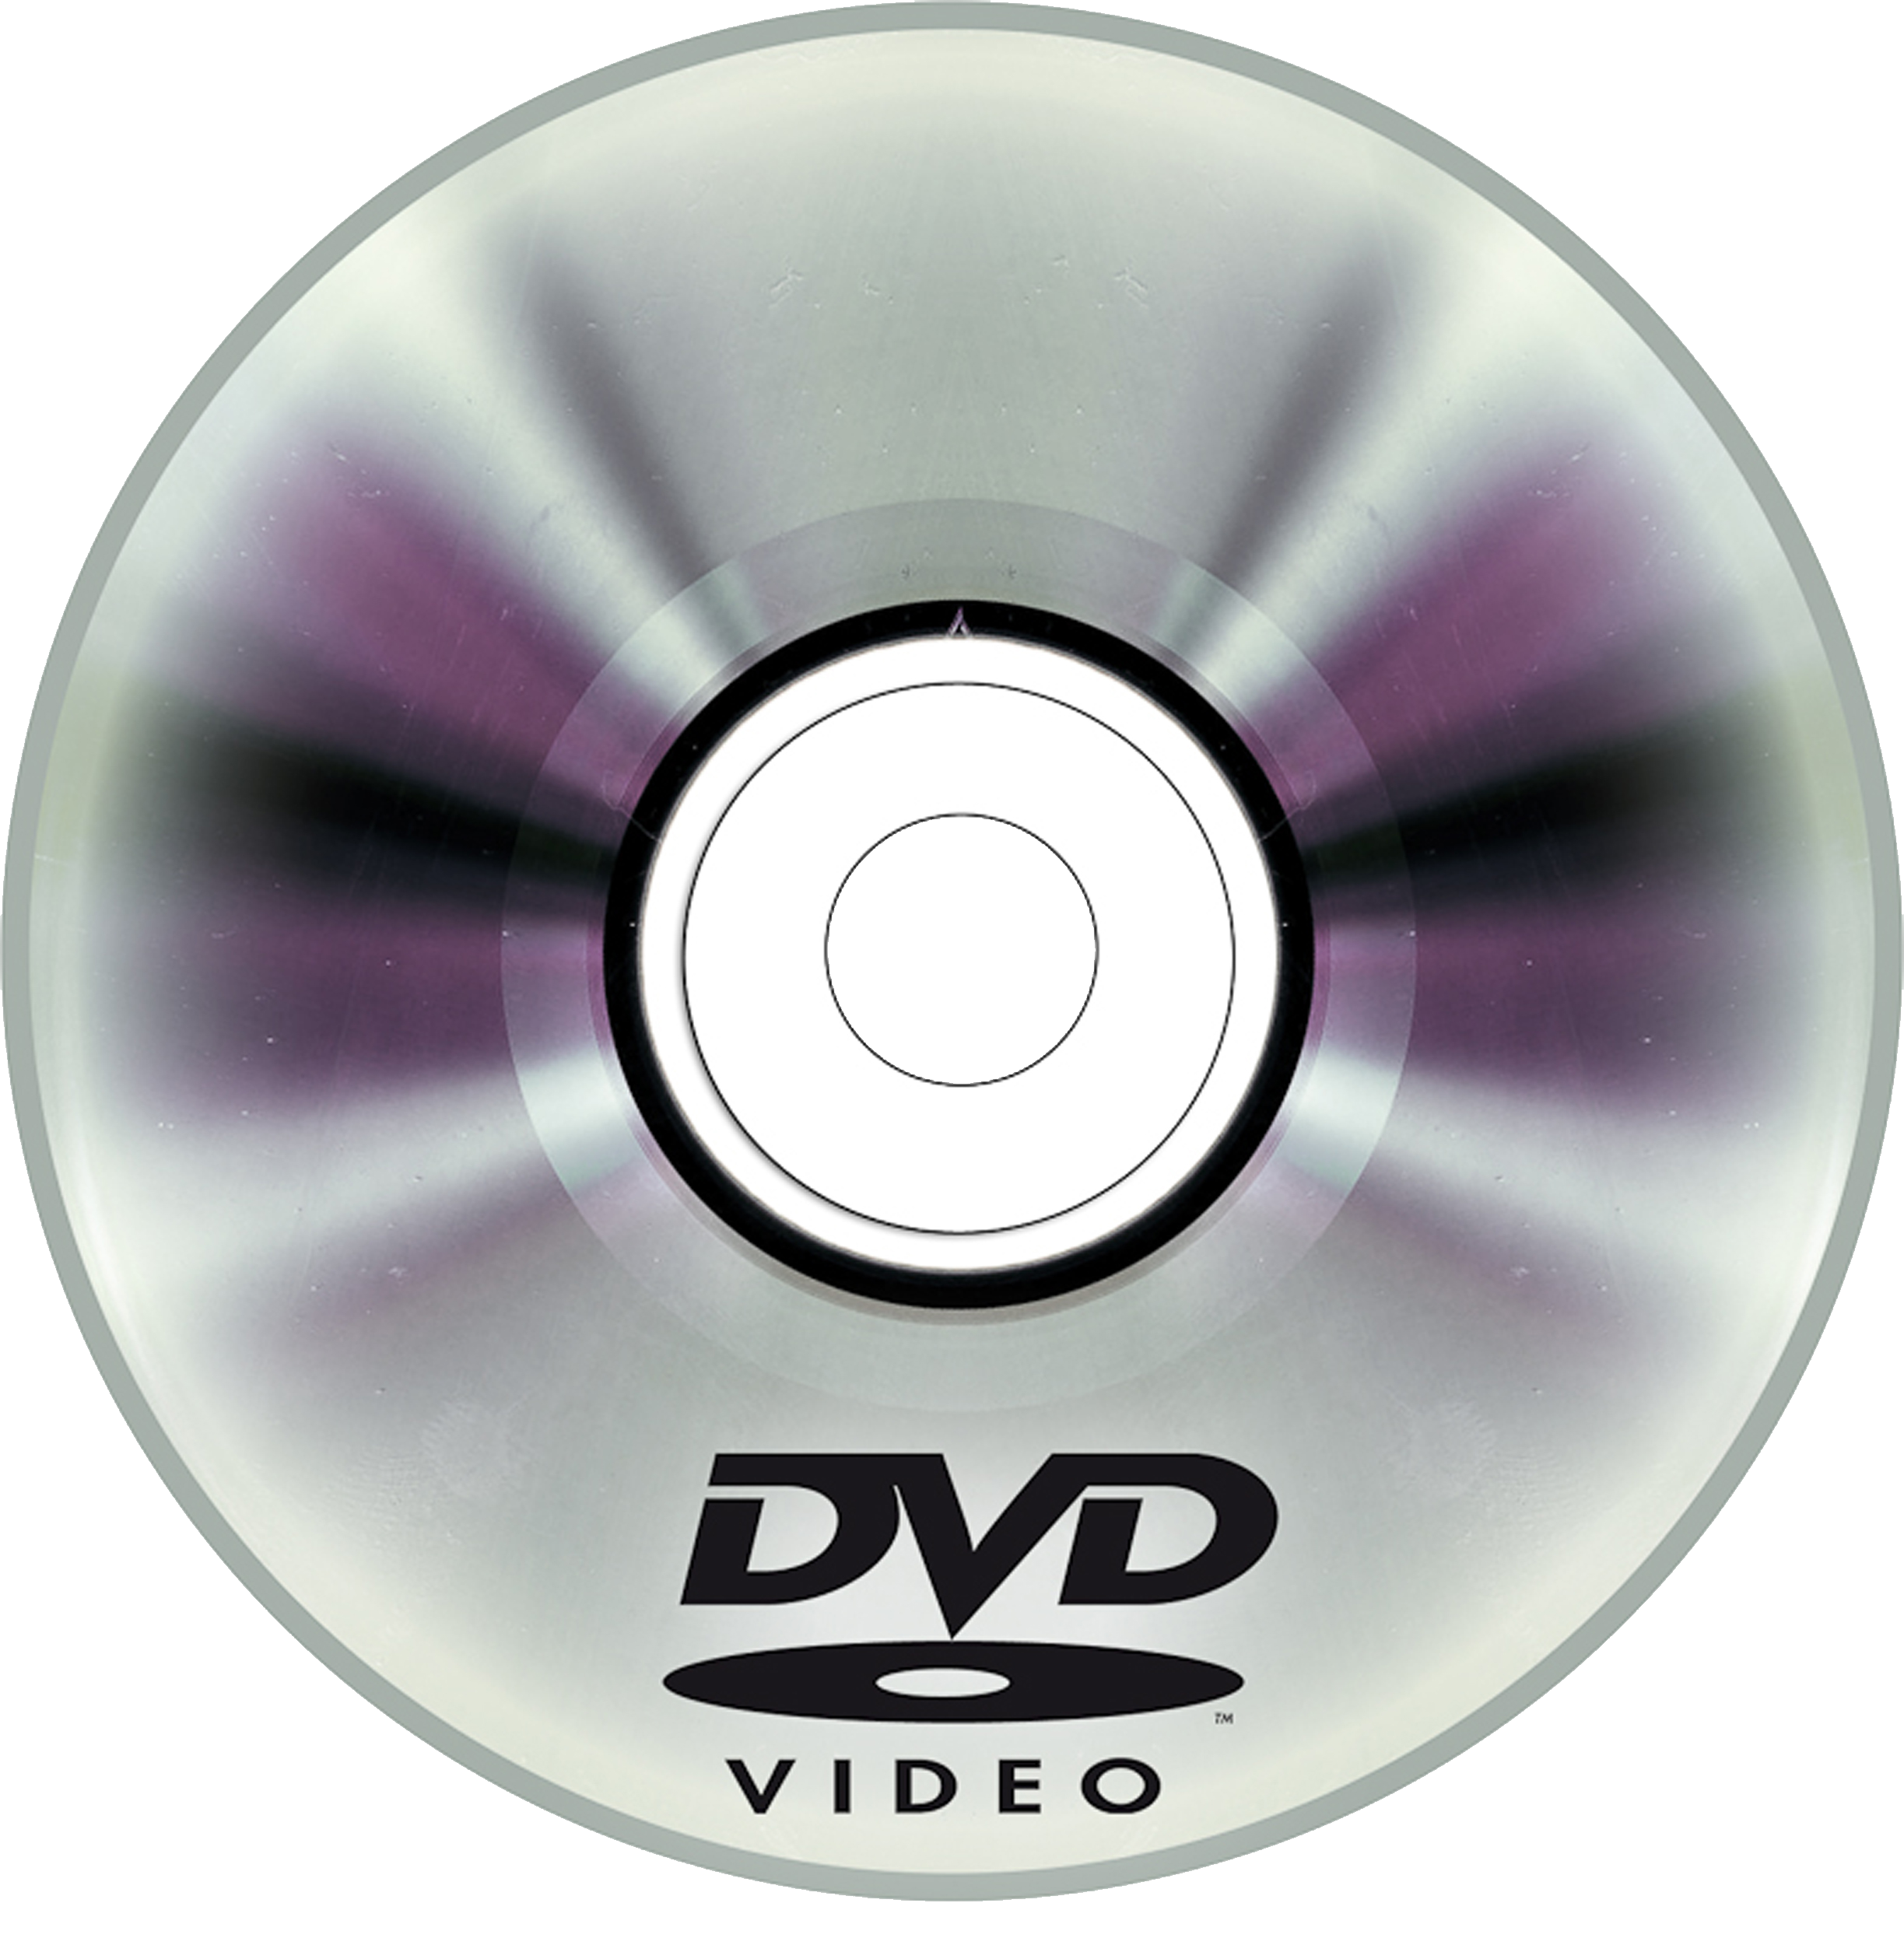 CD disk on a transparent background. A realistic compact disc